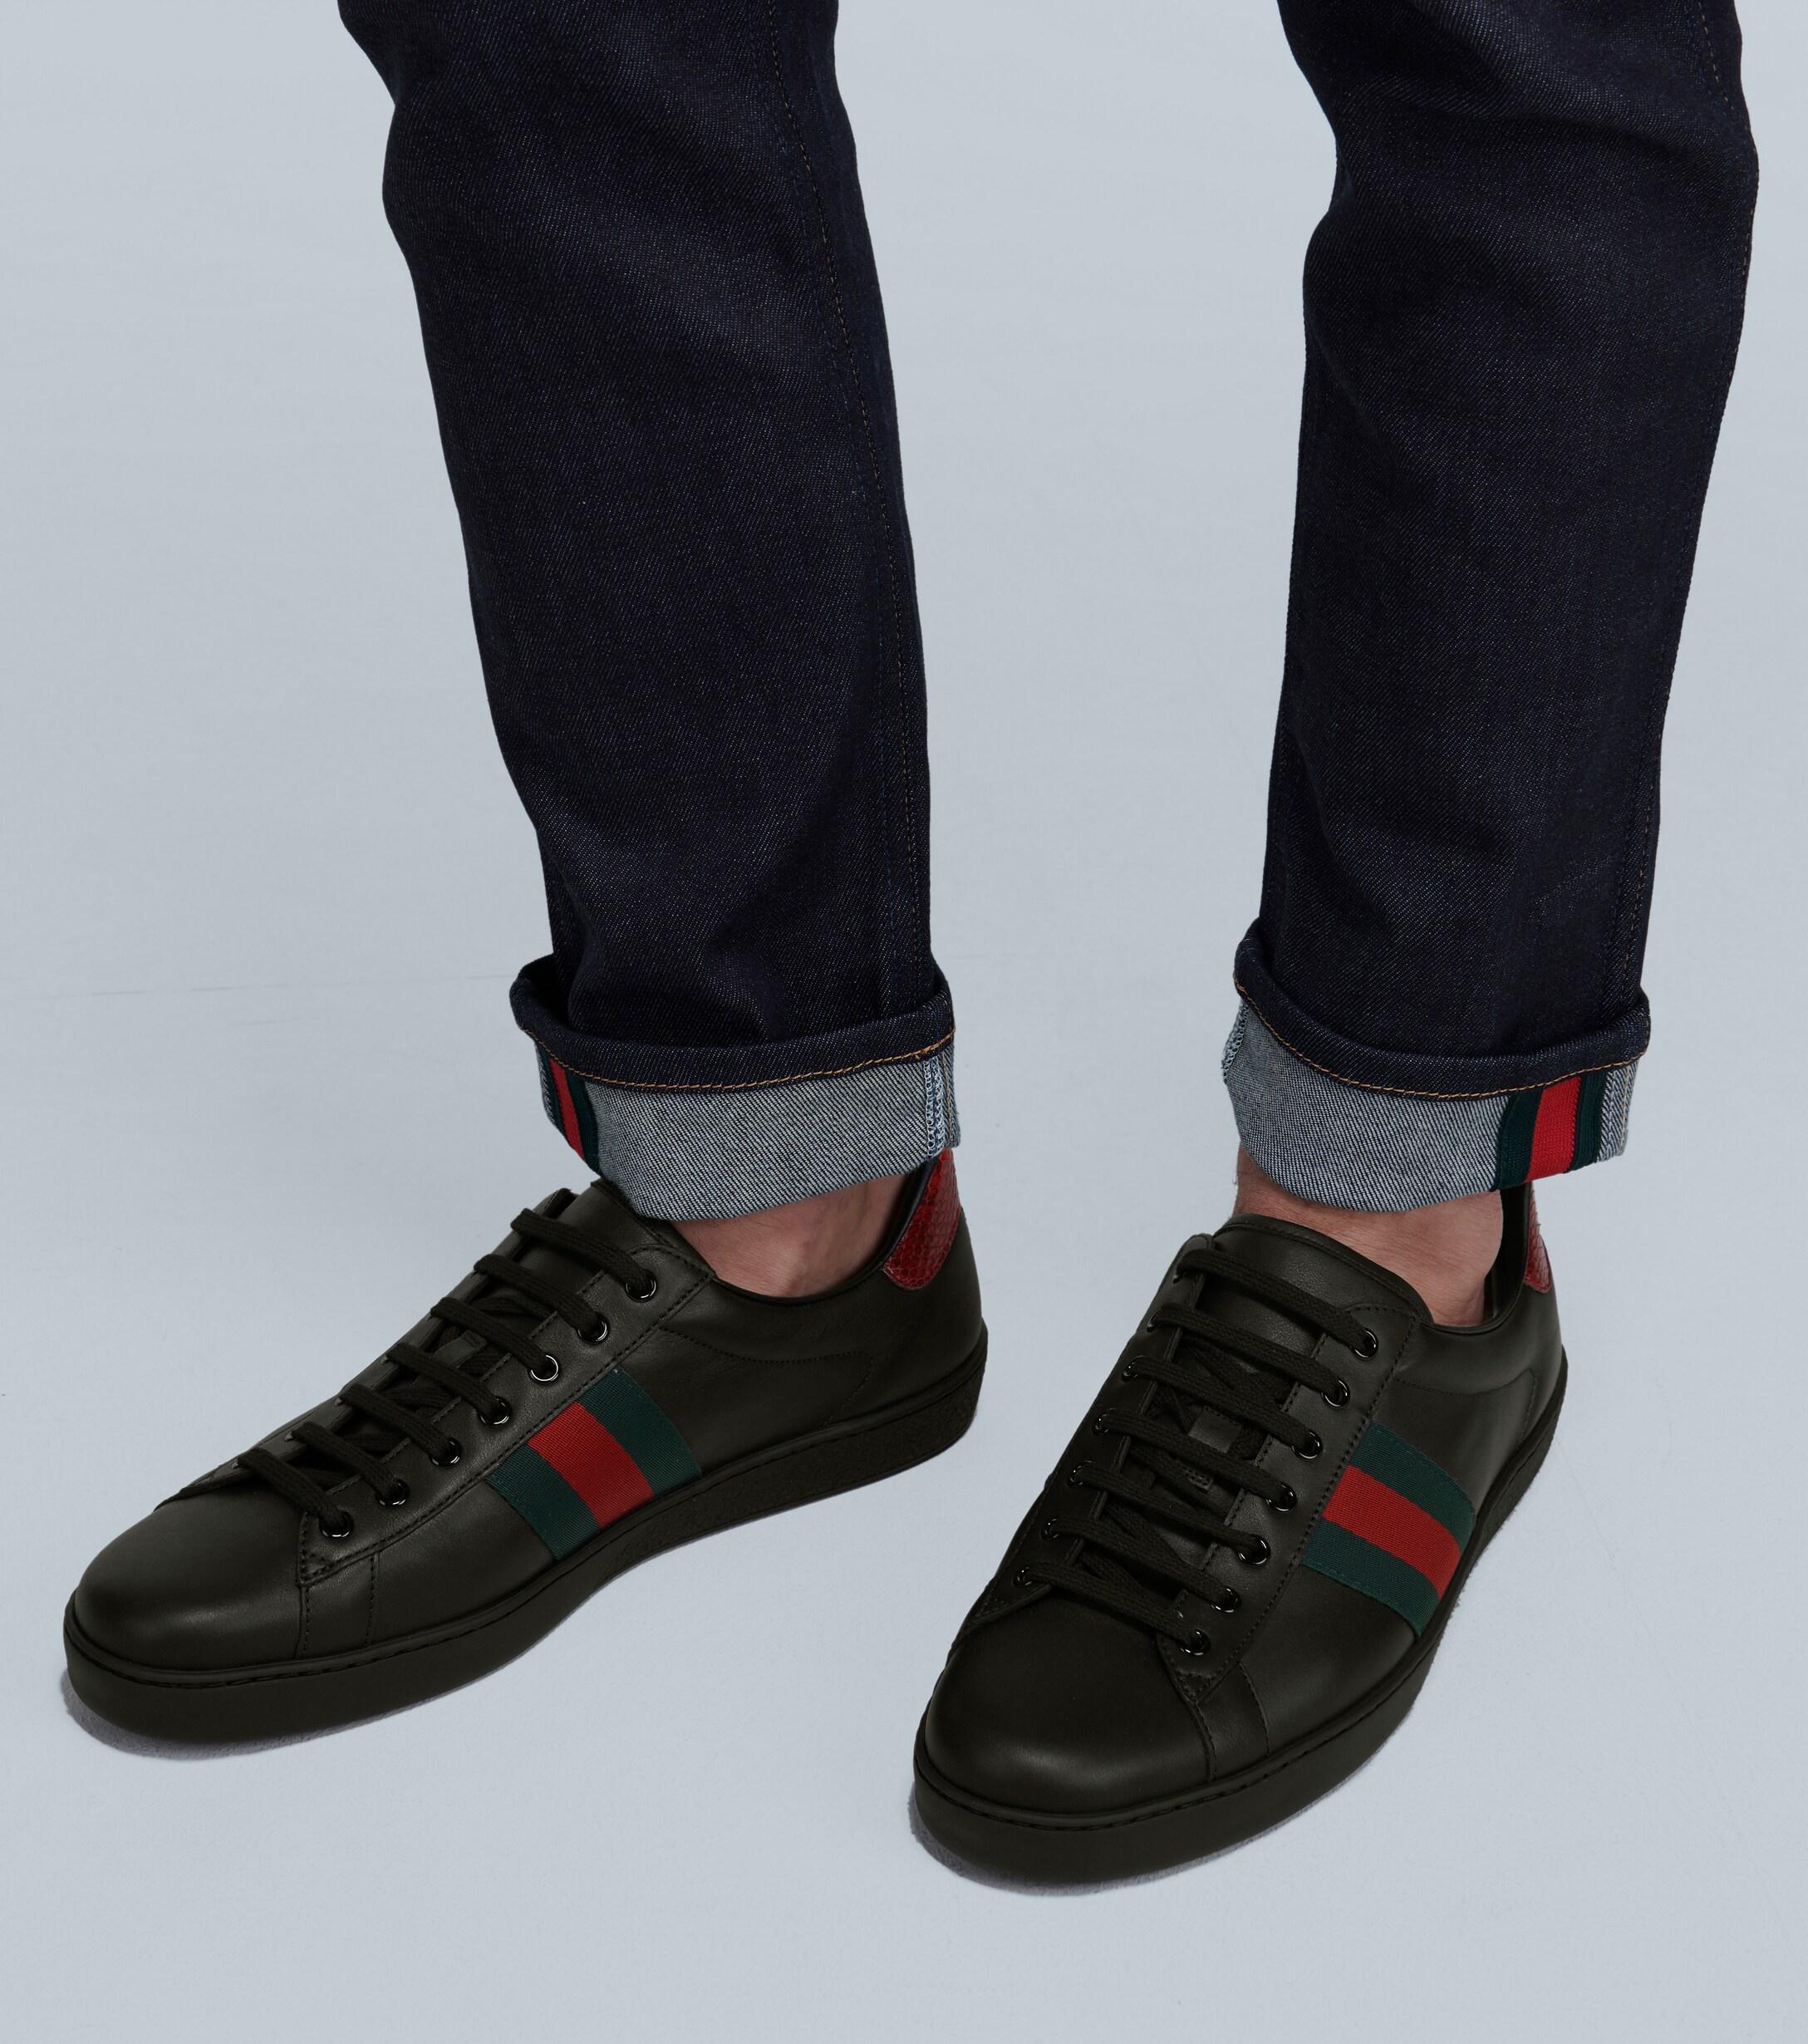 Gucci Ace Leather Sneaker in Black Green (Black) for Men - Save 61% - Lyst